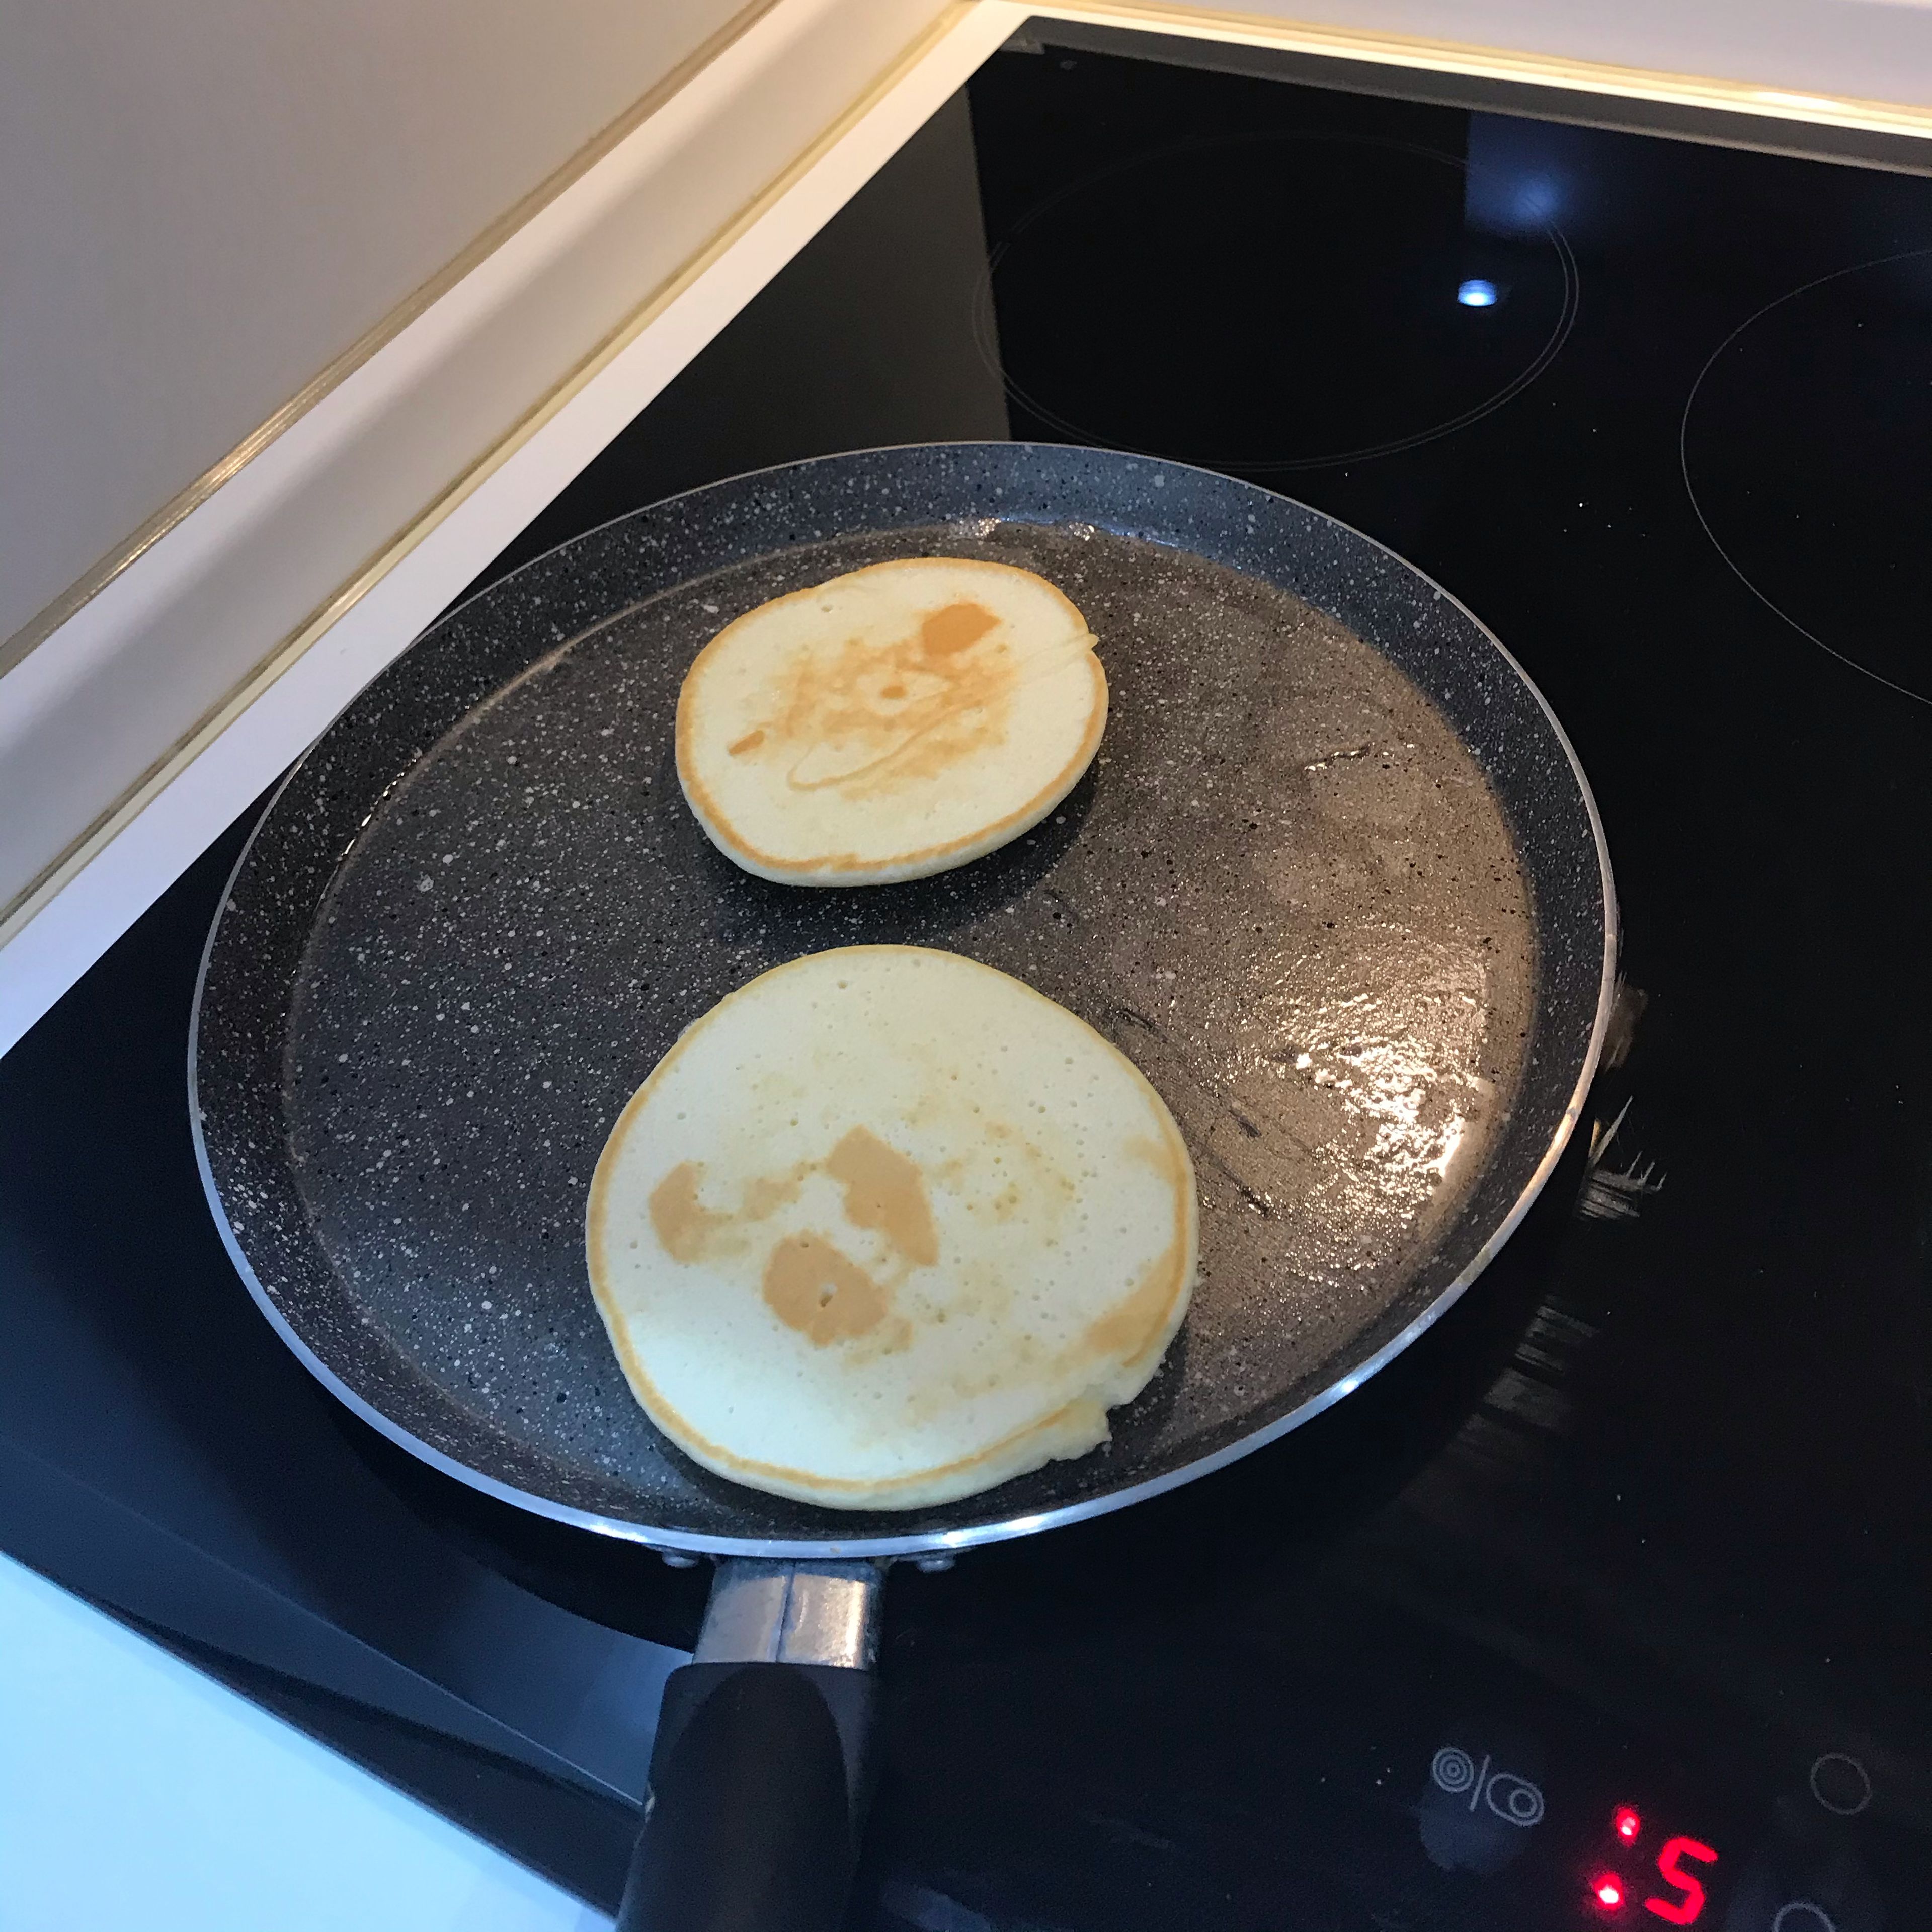 Finally heat the pan, put in a drop of oil and fry the pancakes over medium heat.